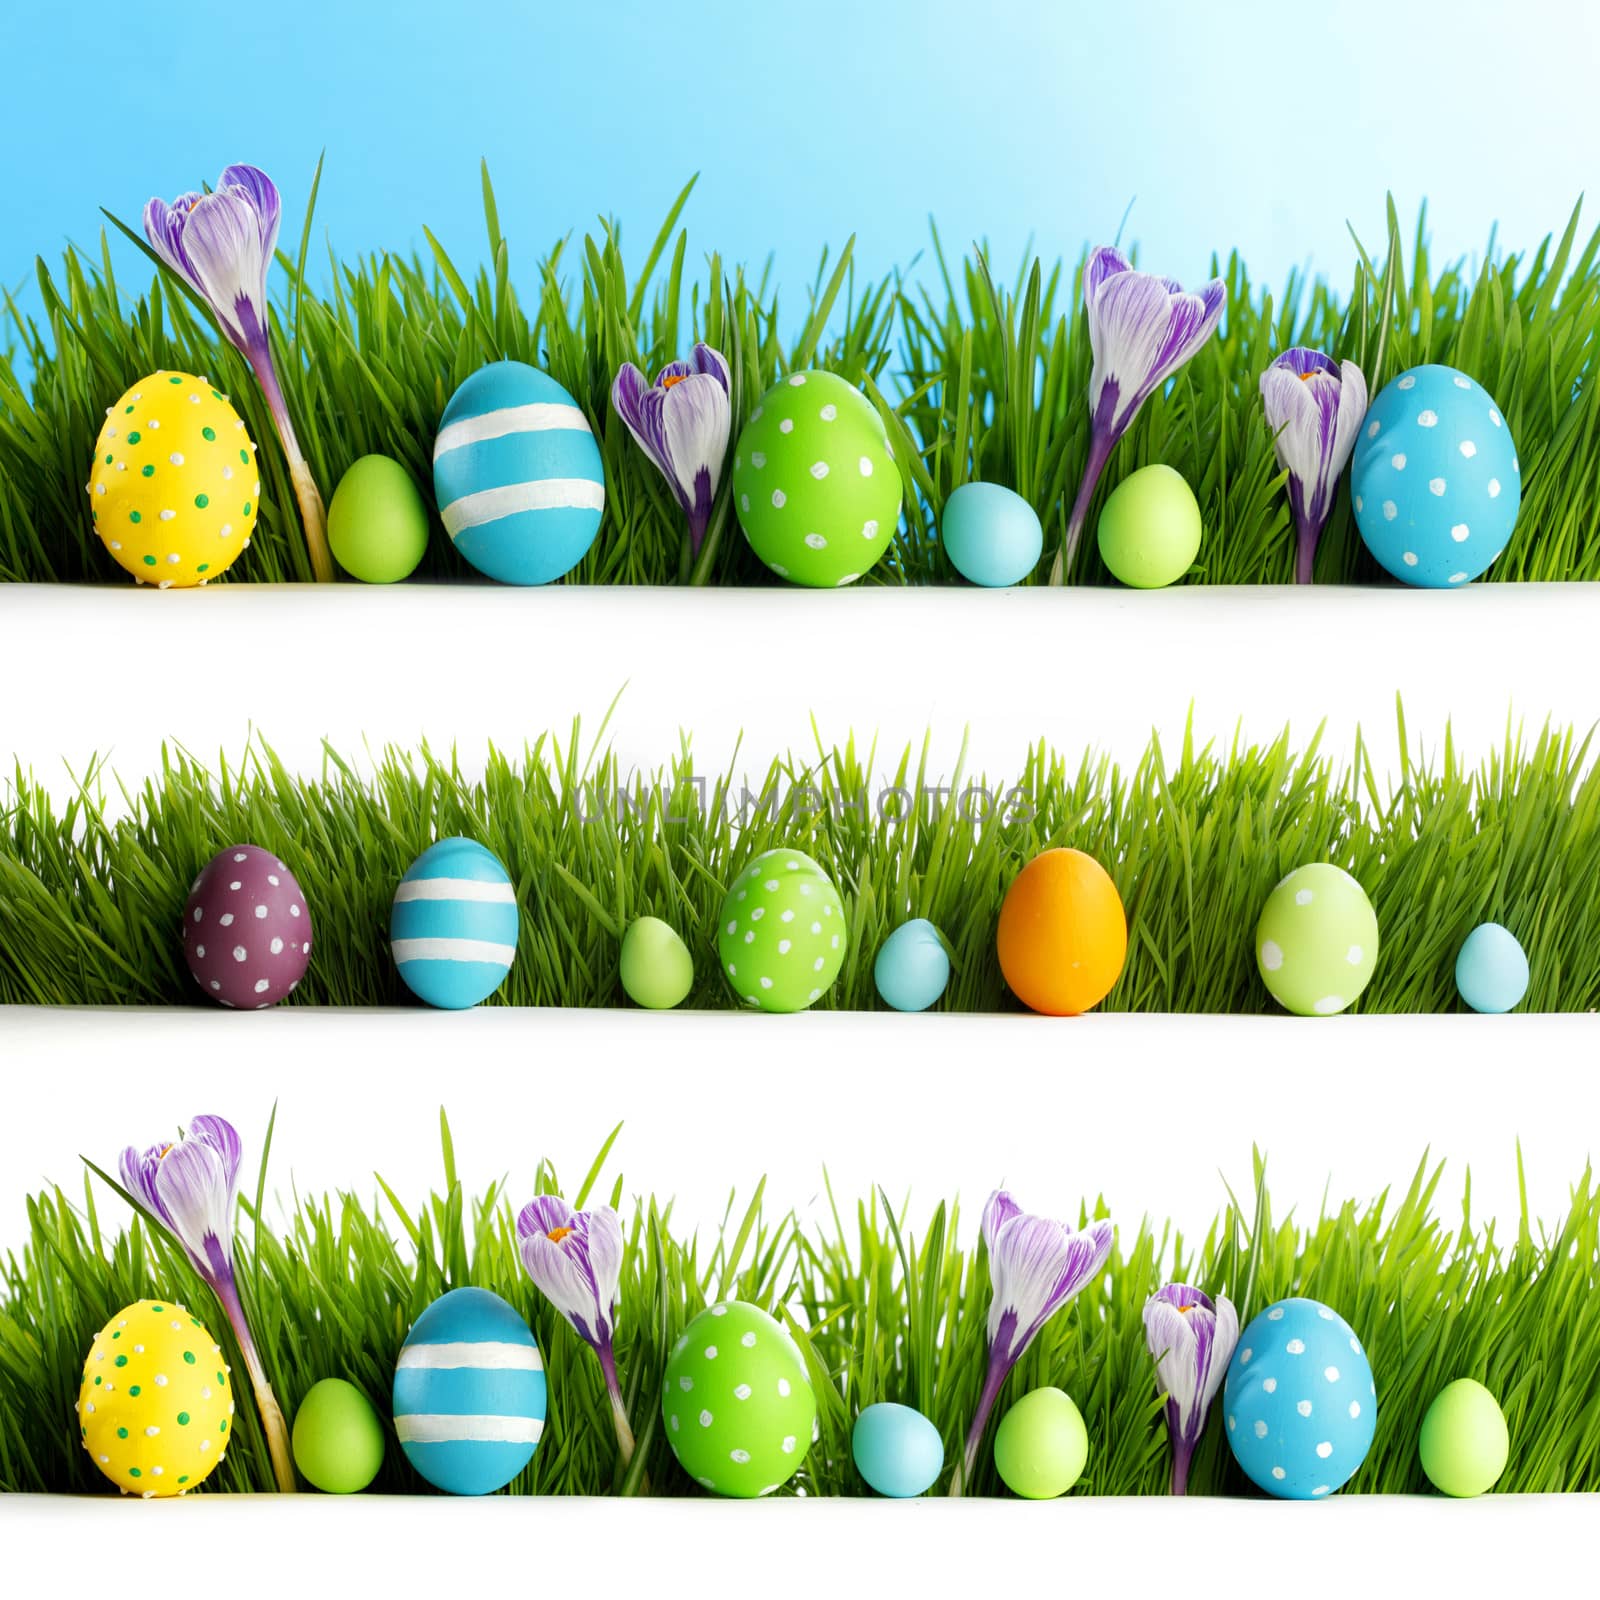 Set of easter eggs in grass by Yellowj